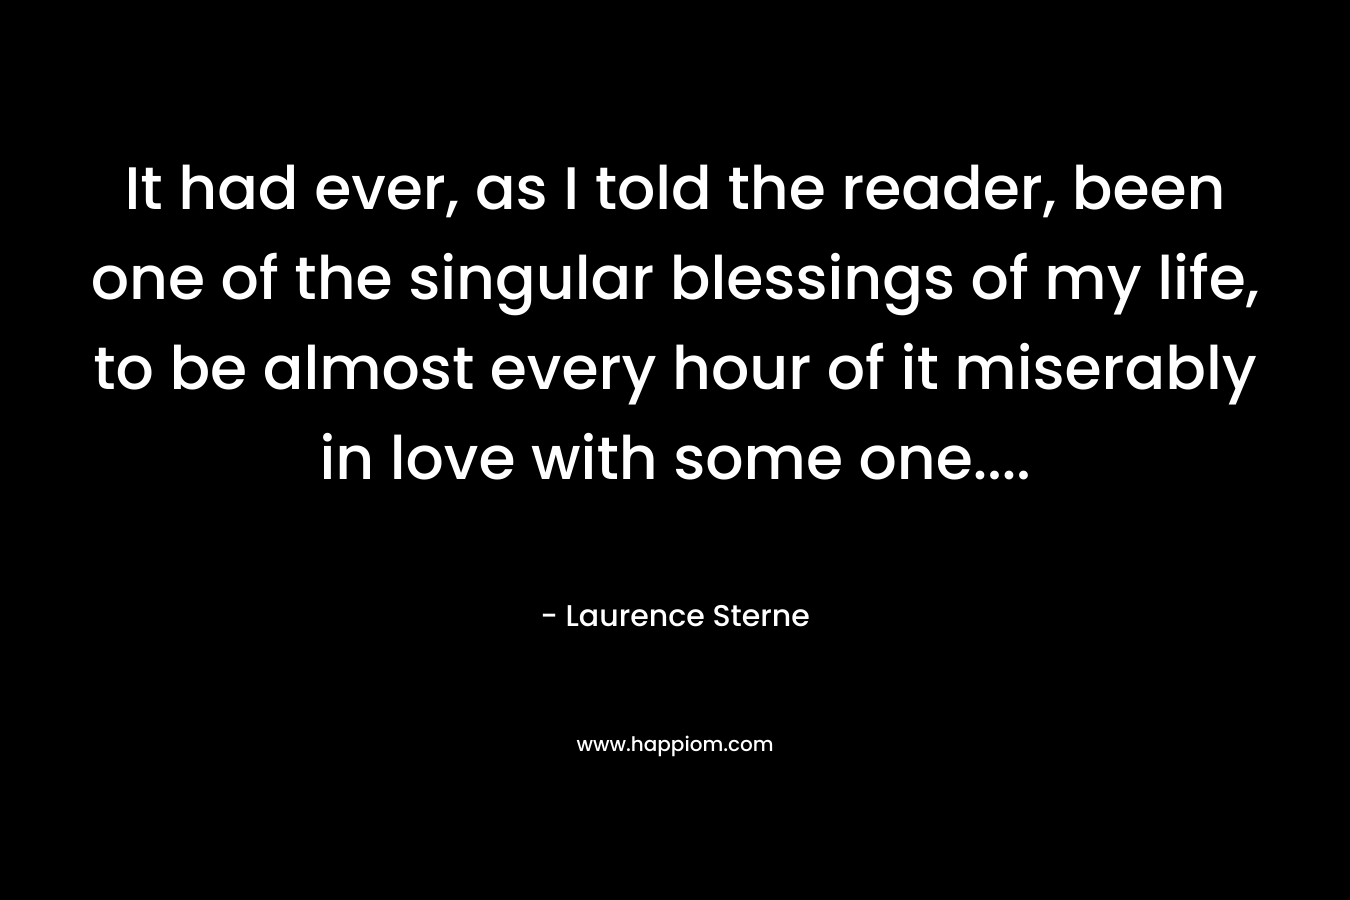 It had ever, as I told the reader, been one of the singular blessings of my life, to be almost every hour of it miserably in love with some one....